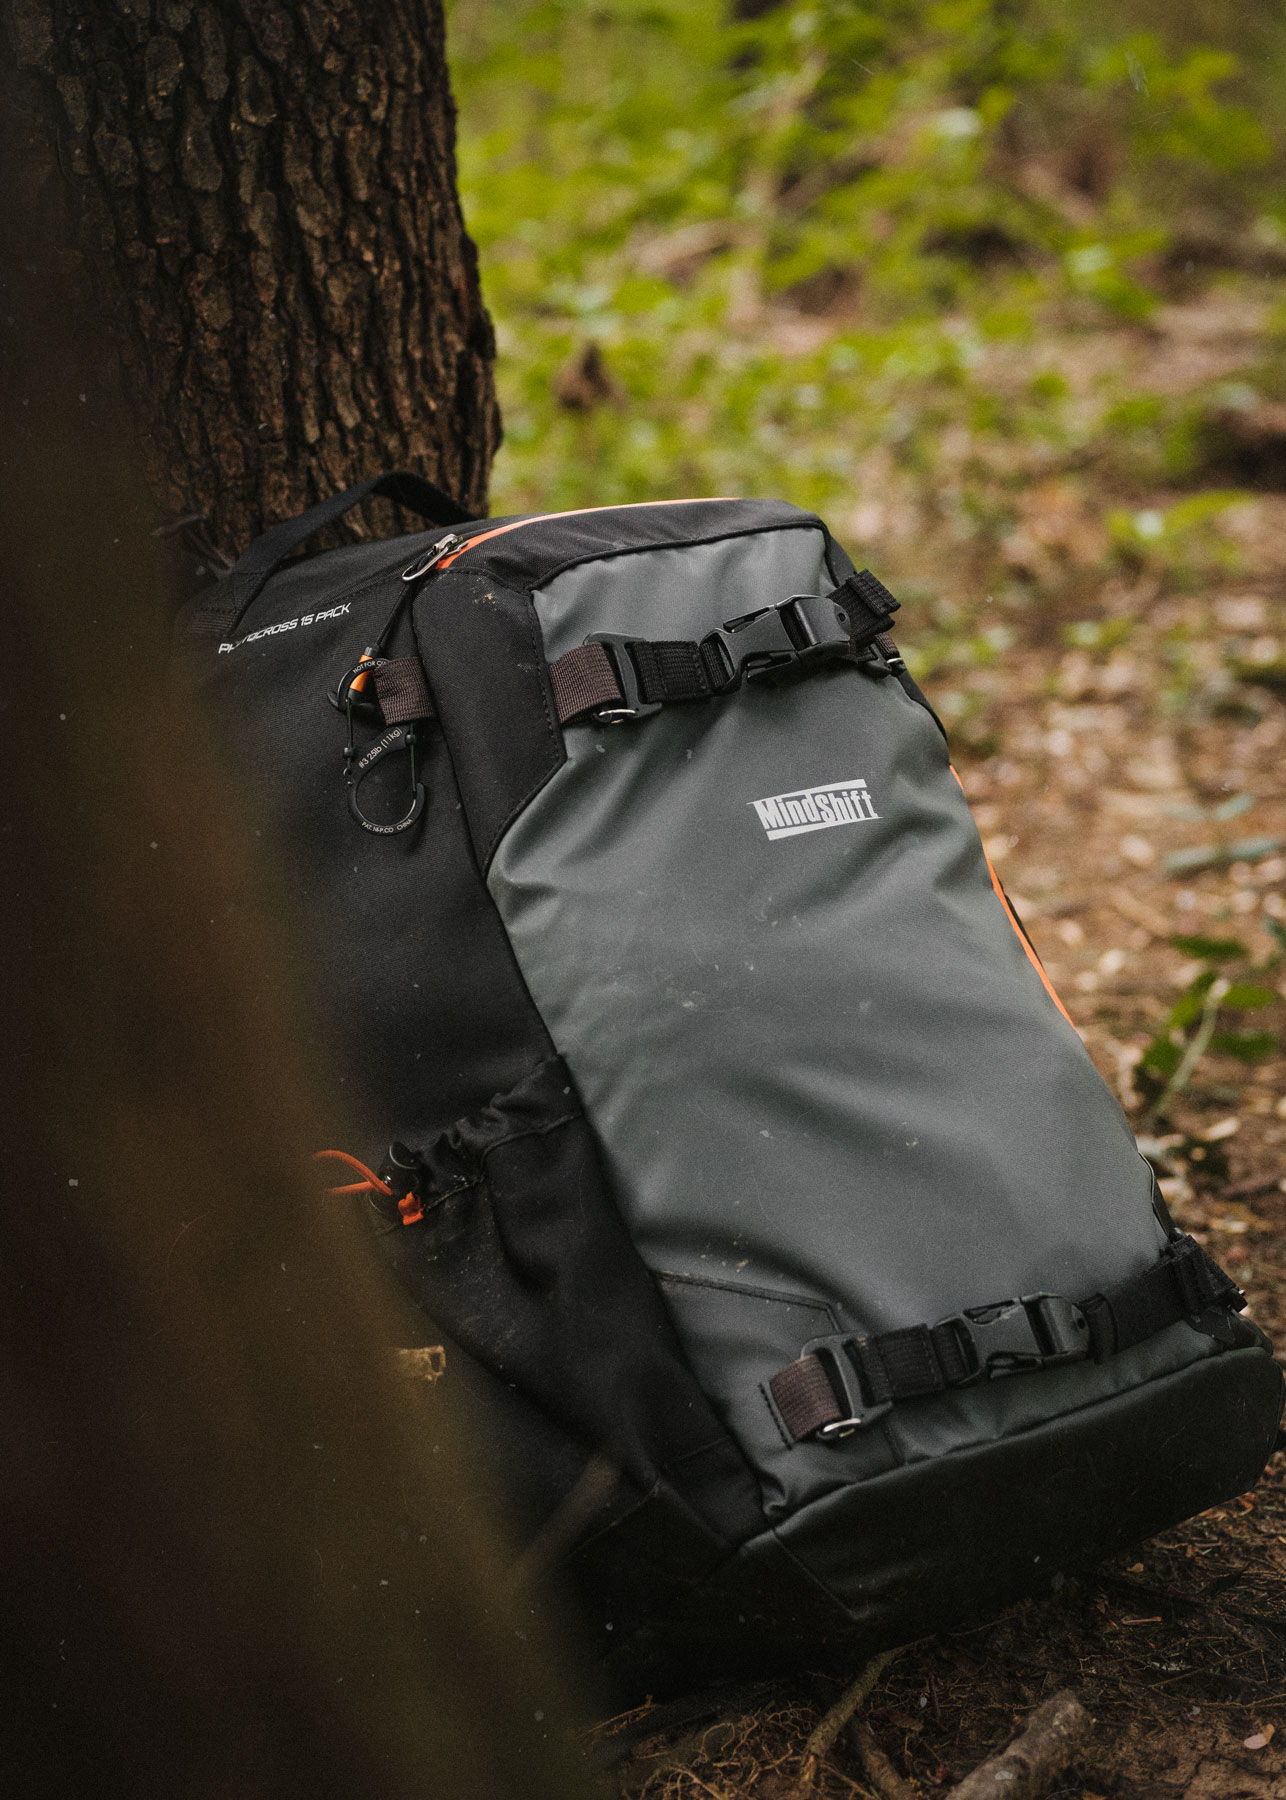 Mindshift Photocross 15 Backpack Review